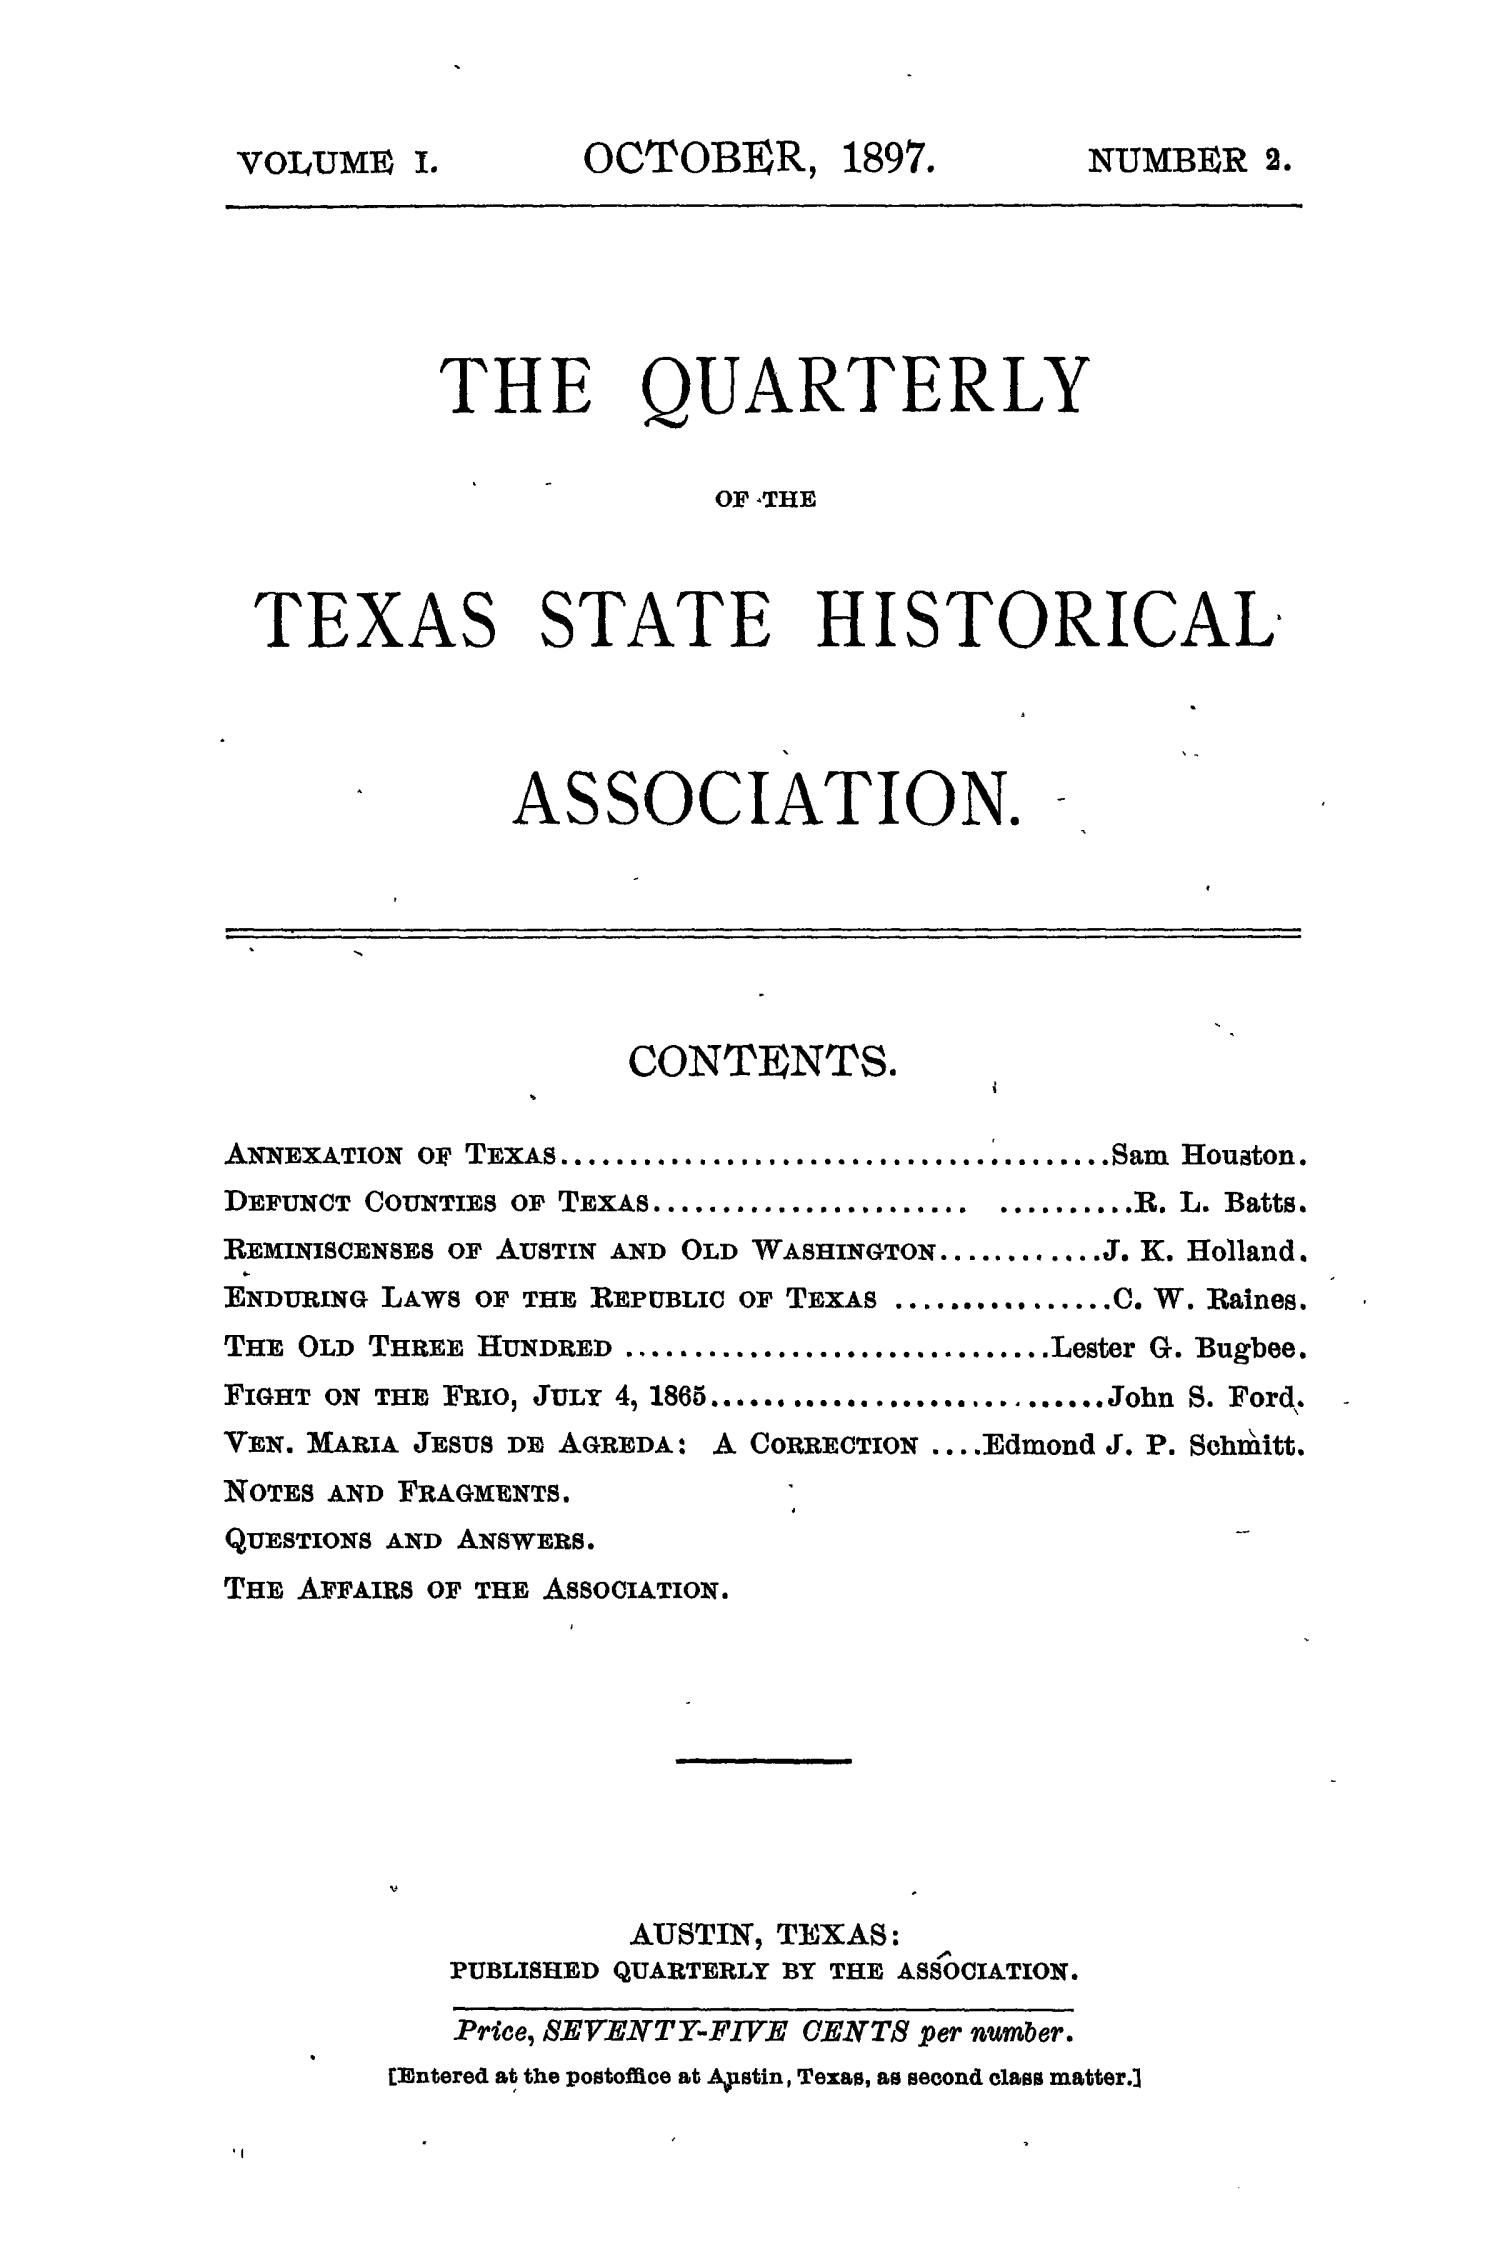 The Quarterly of the Texas State Historical Association, Volume 1, July 1897 - April, 1898
                                                
                                                    None
                                                